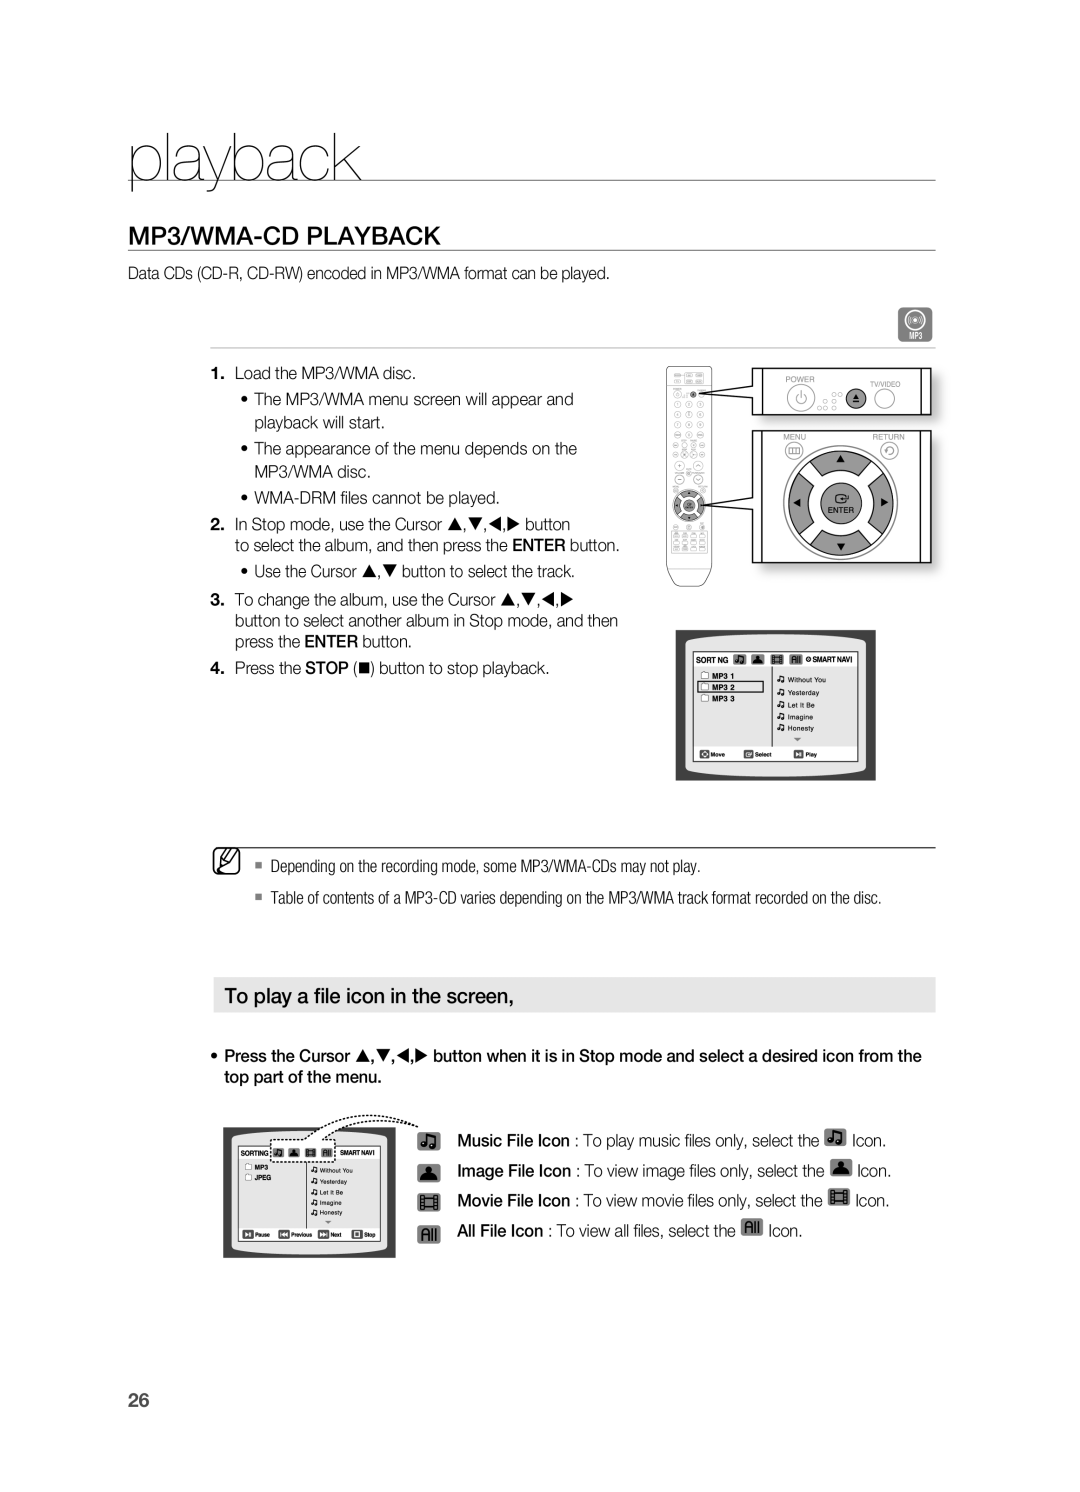 Samsung HT-X710 user manual MP3/WMA-CDPlAYBACK, playback, To play a file icon in the screen 